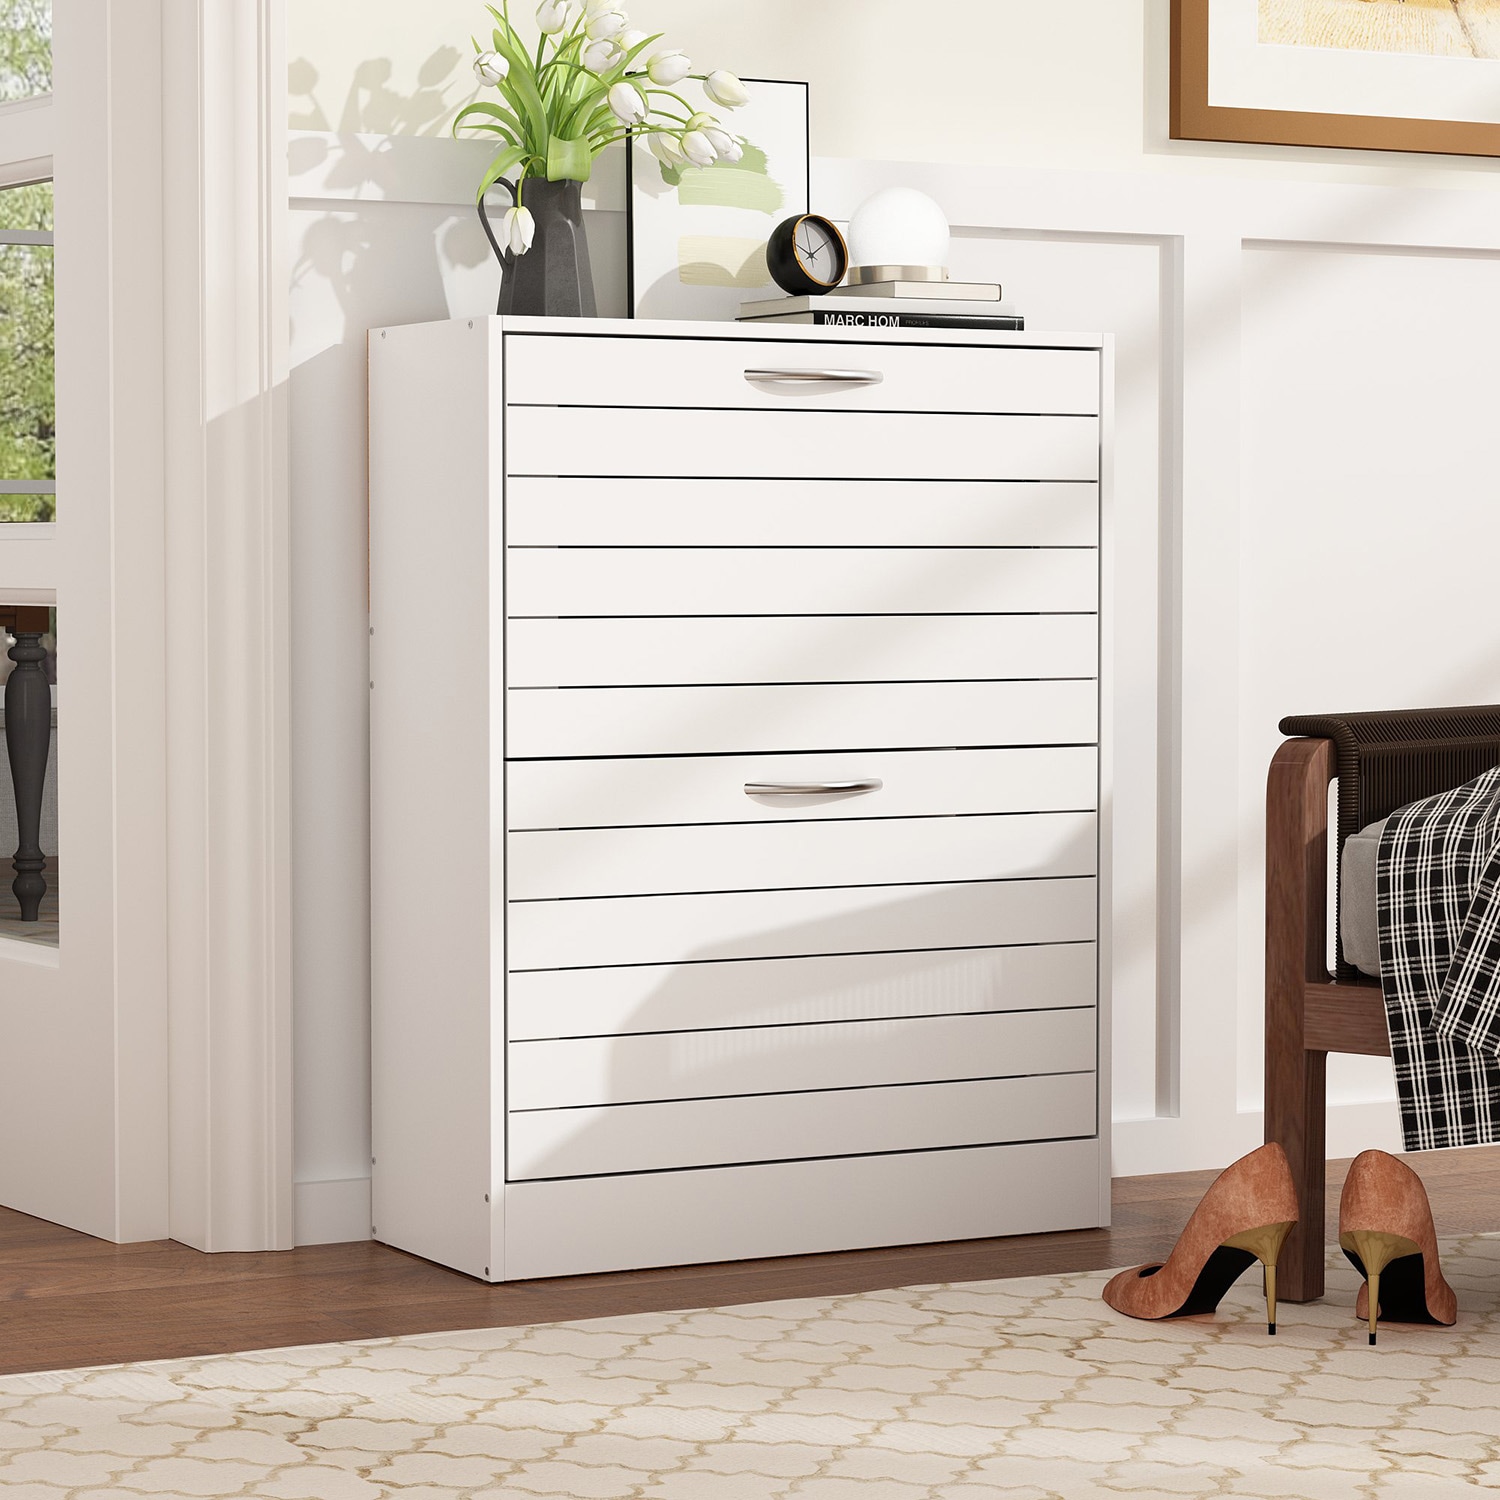 FUFU&GAGA 42.3 in. H x 22.4 in. W Gray Shoe Storage Cabinet with 3-Drawers for Entryway Hallway